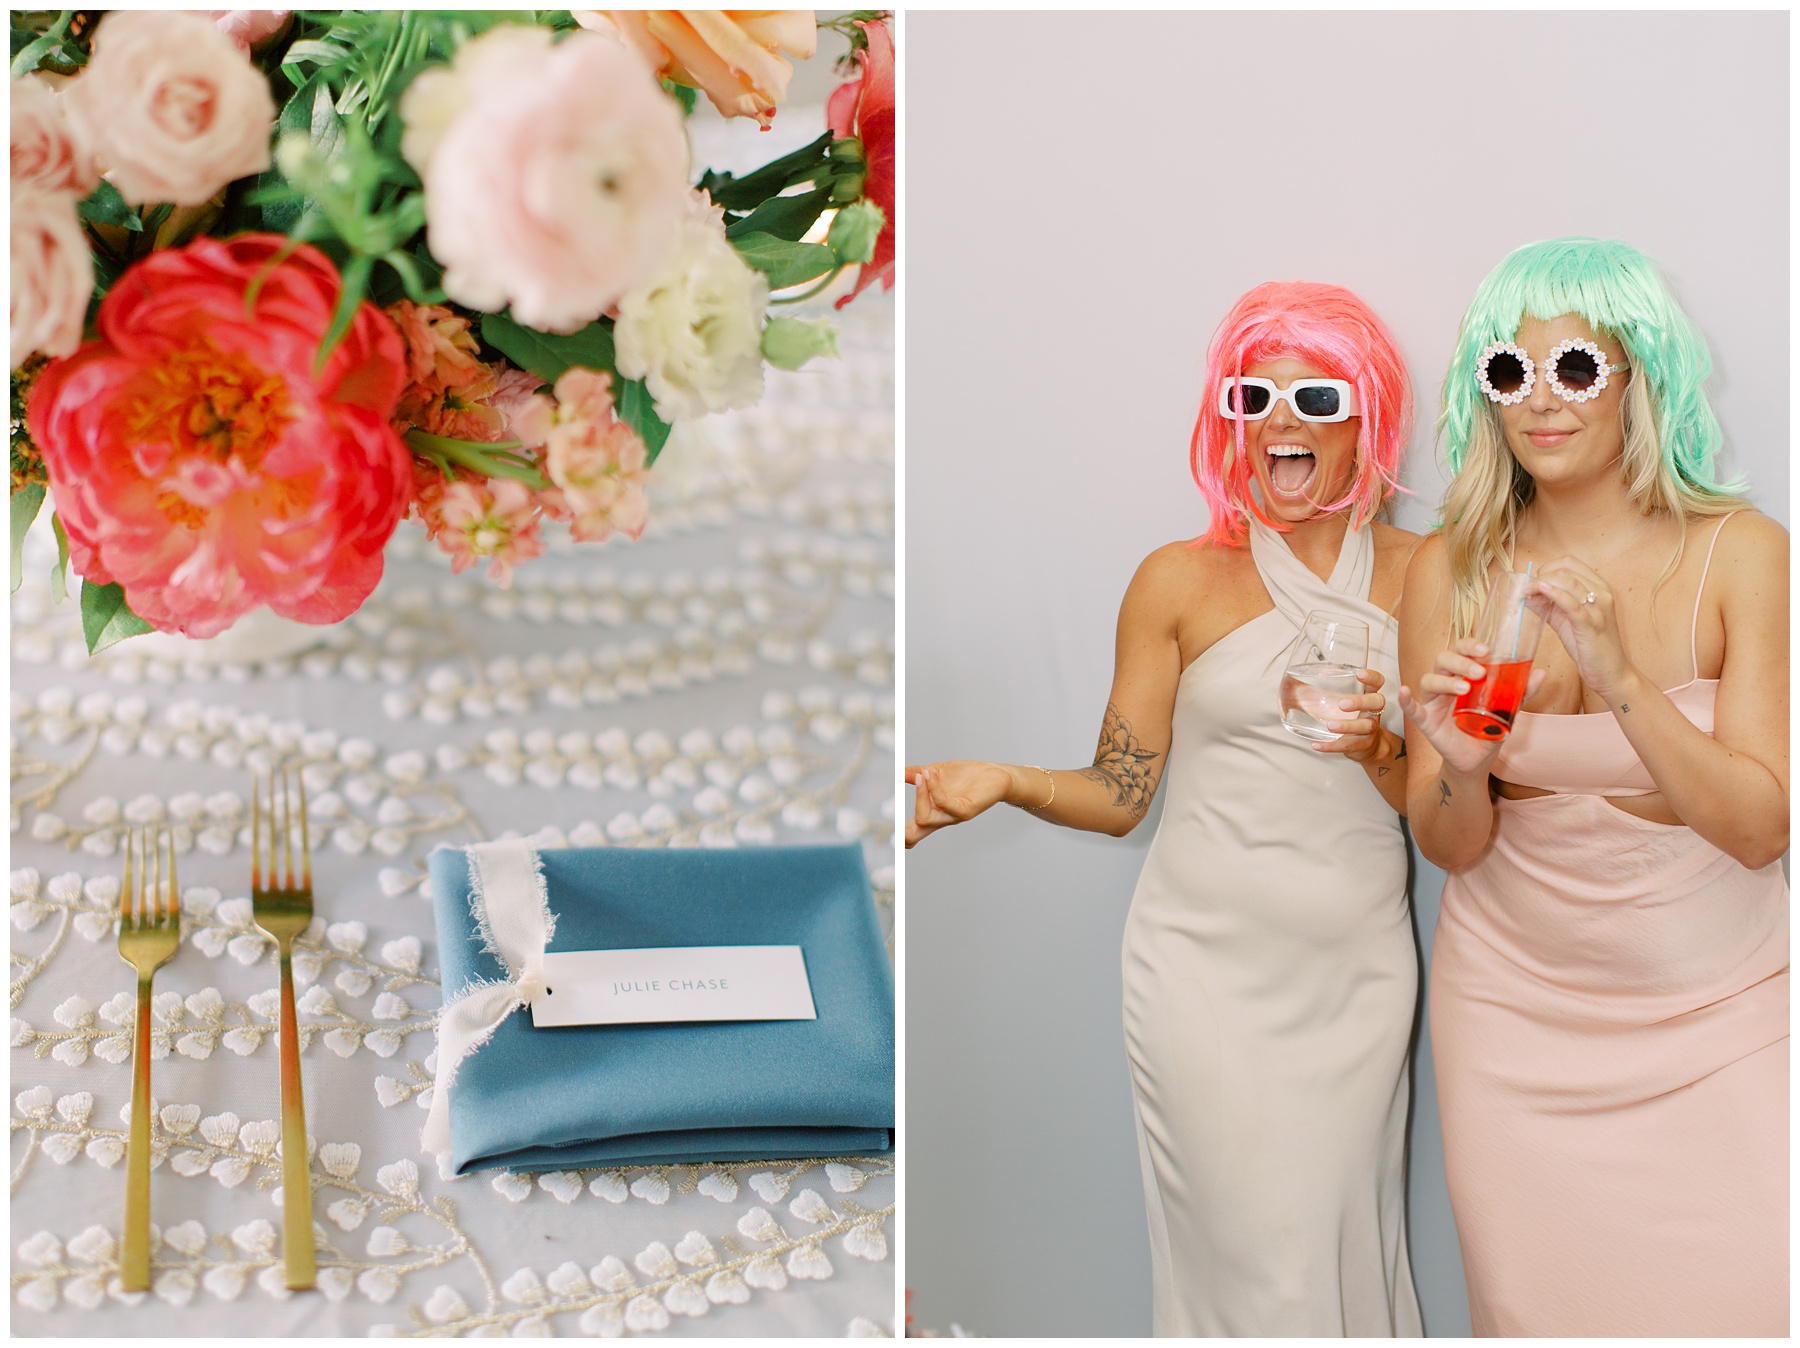 place setting with gold silverware and blue napkin next to photo of guests wearing bright wigs and sunglasses in photo booth 